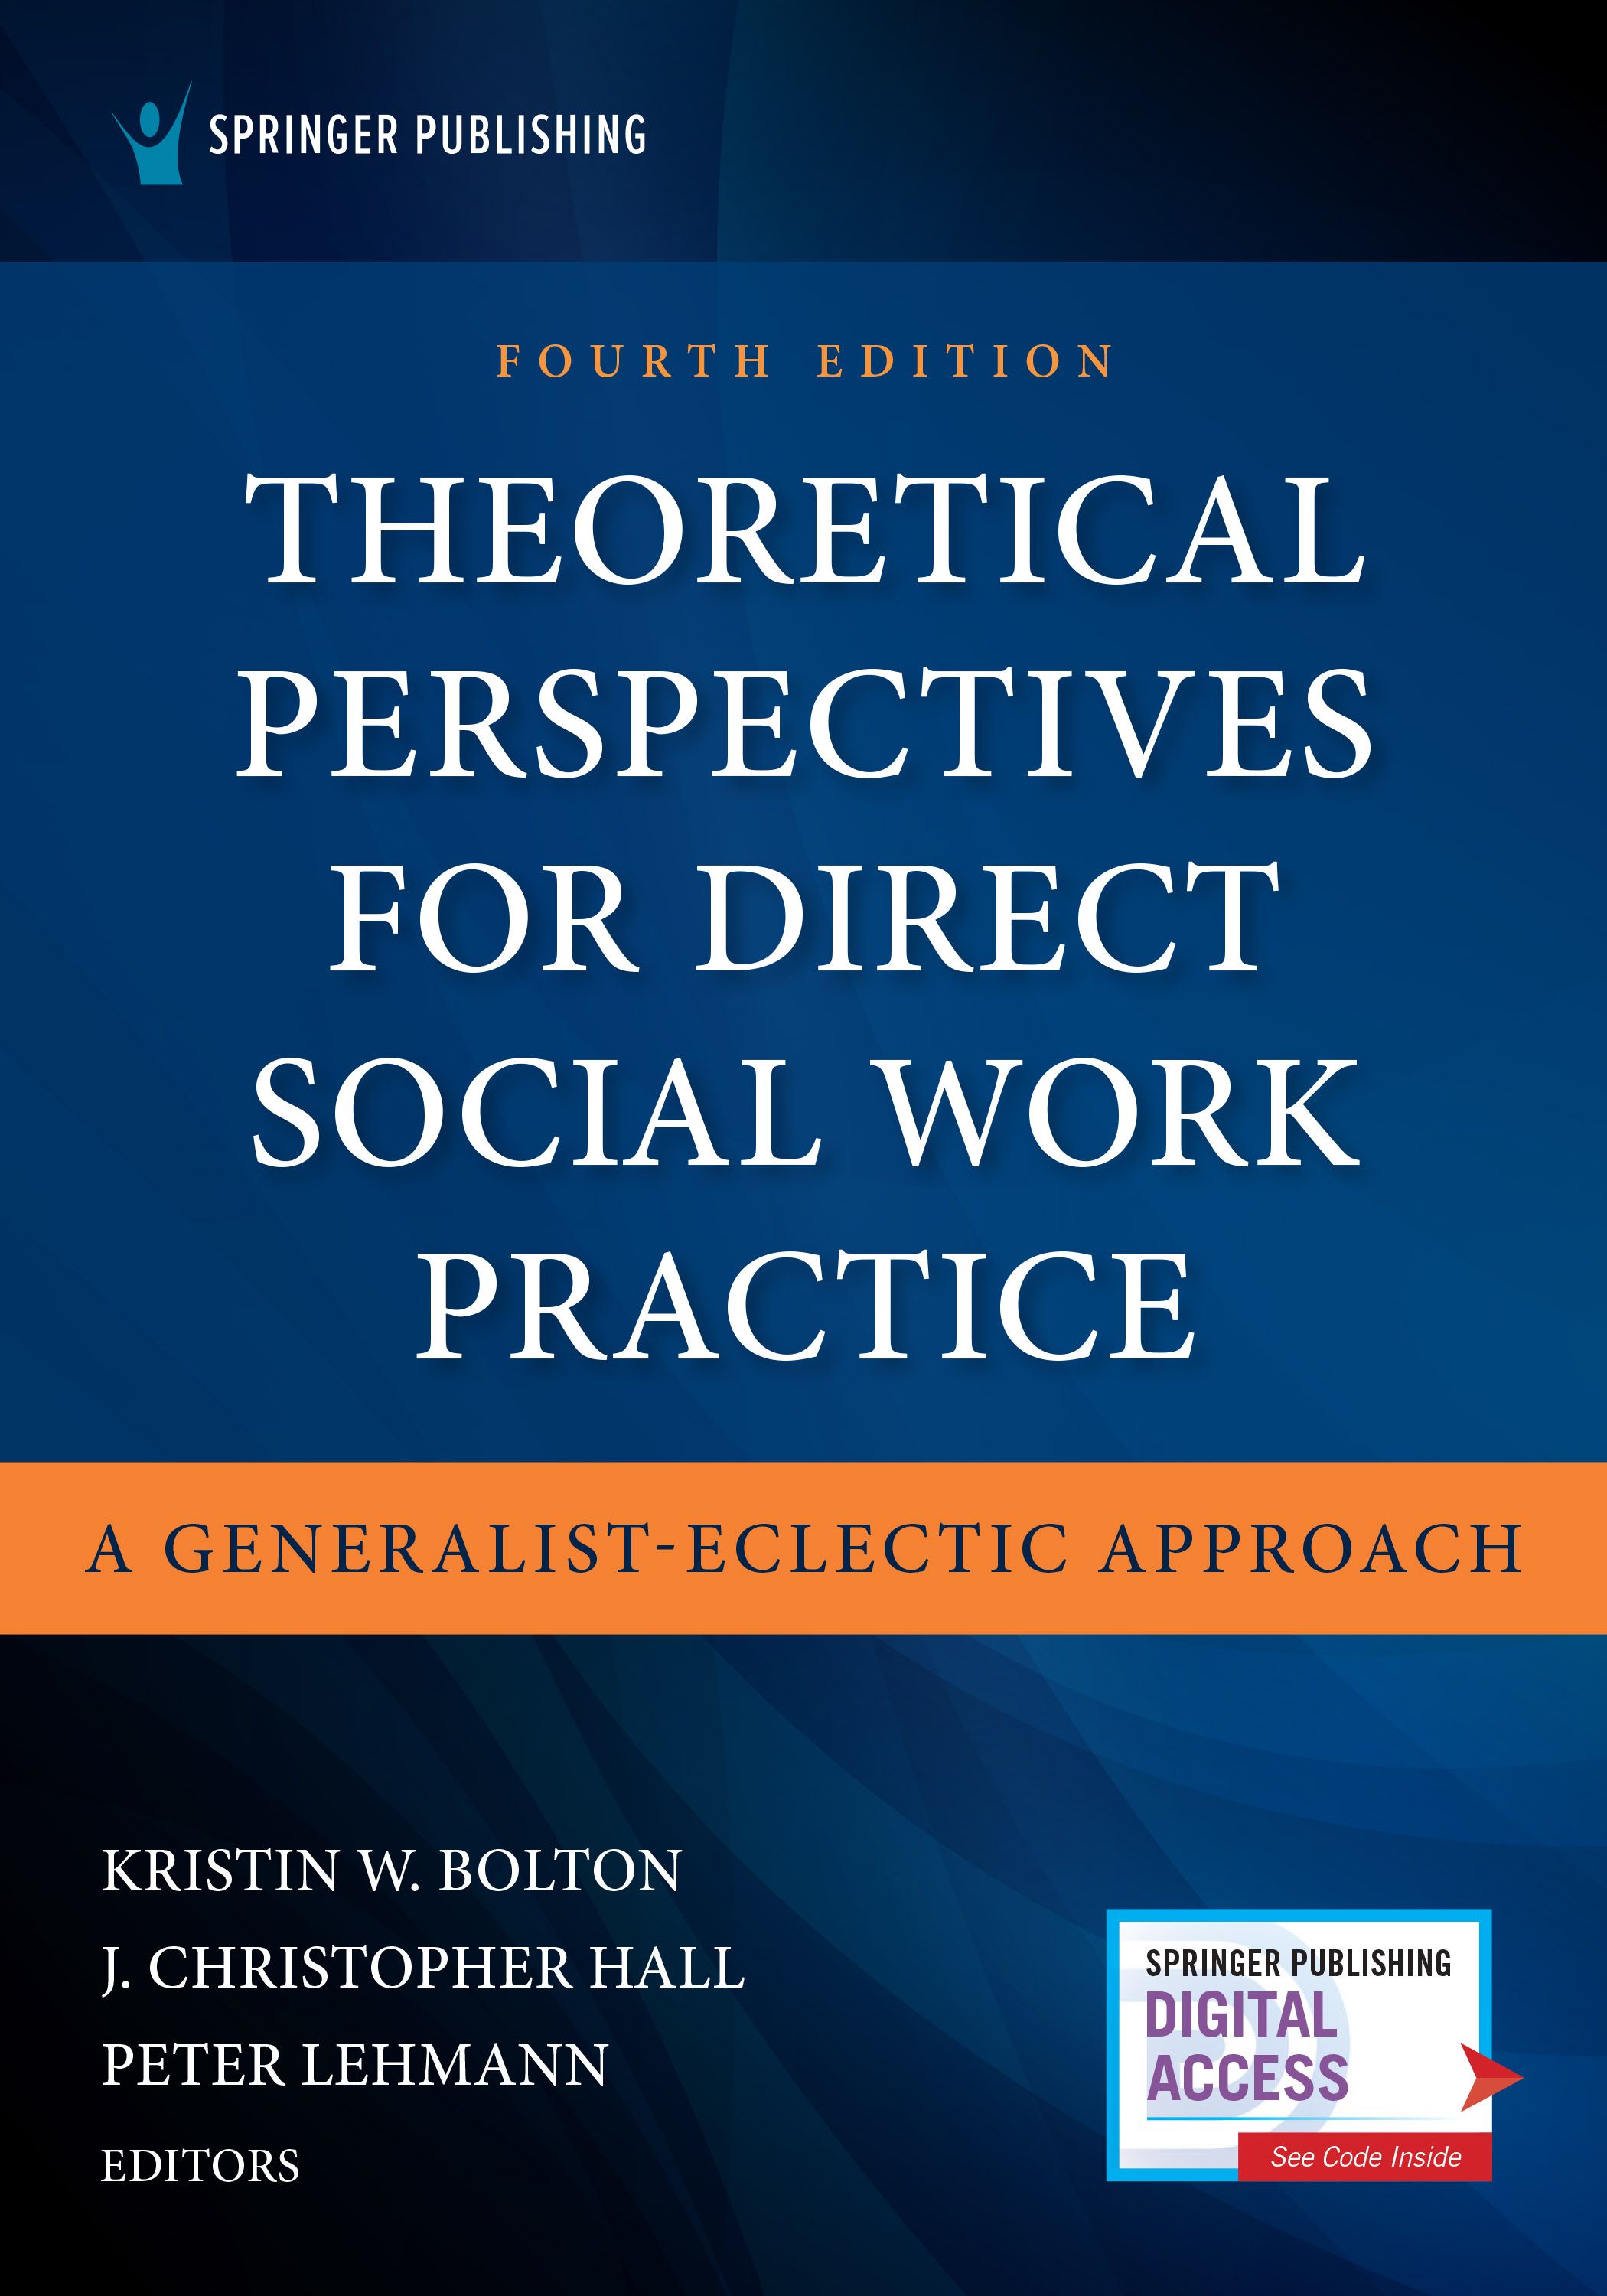 Direct　Theoretical　Practice　Perspectives　for　Social　Work